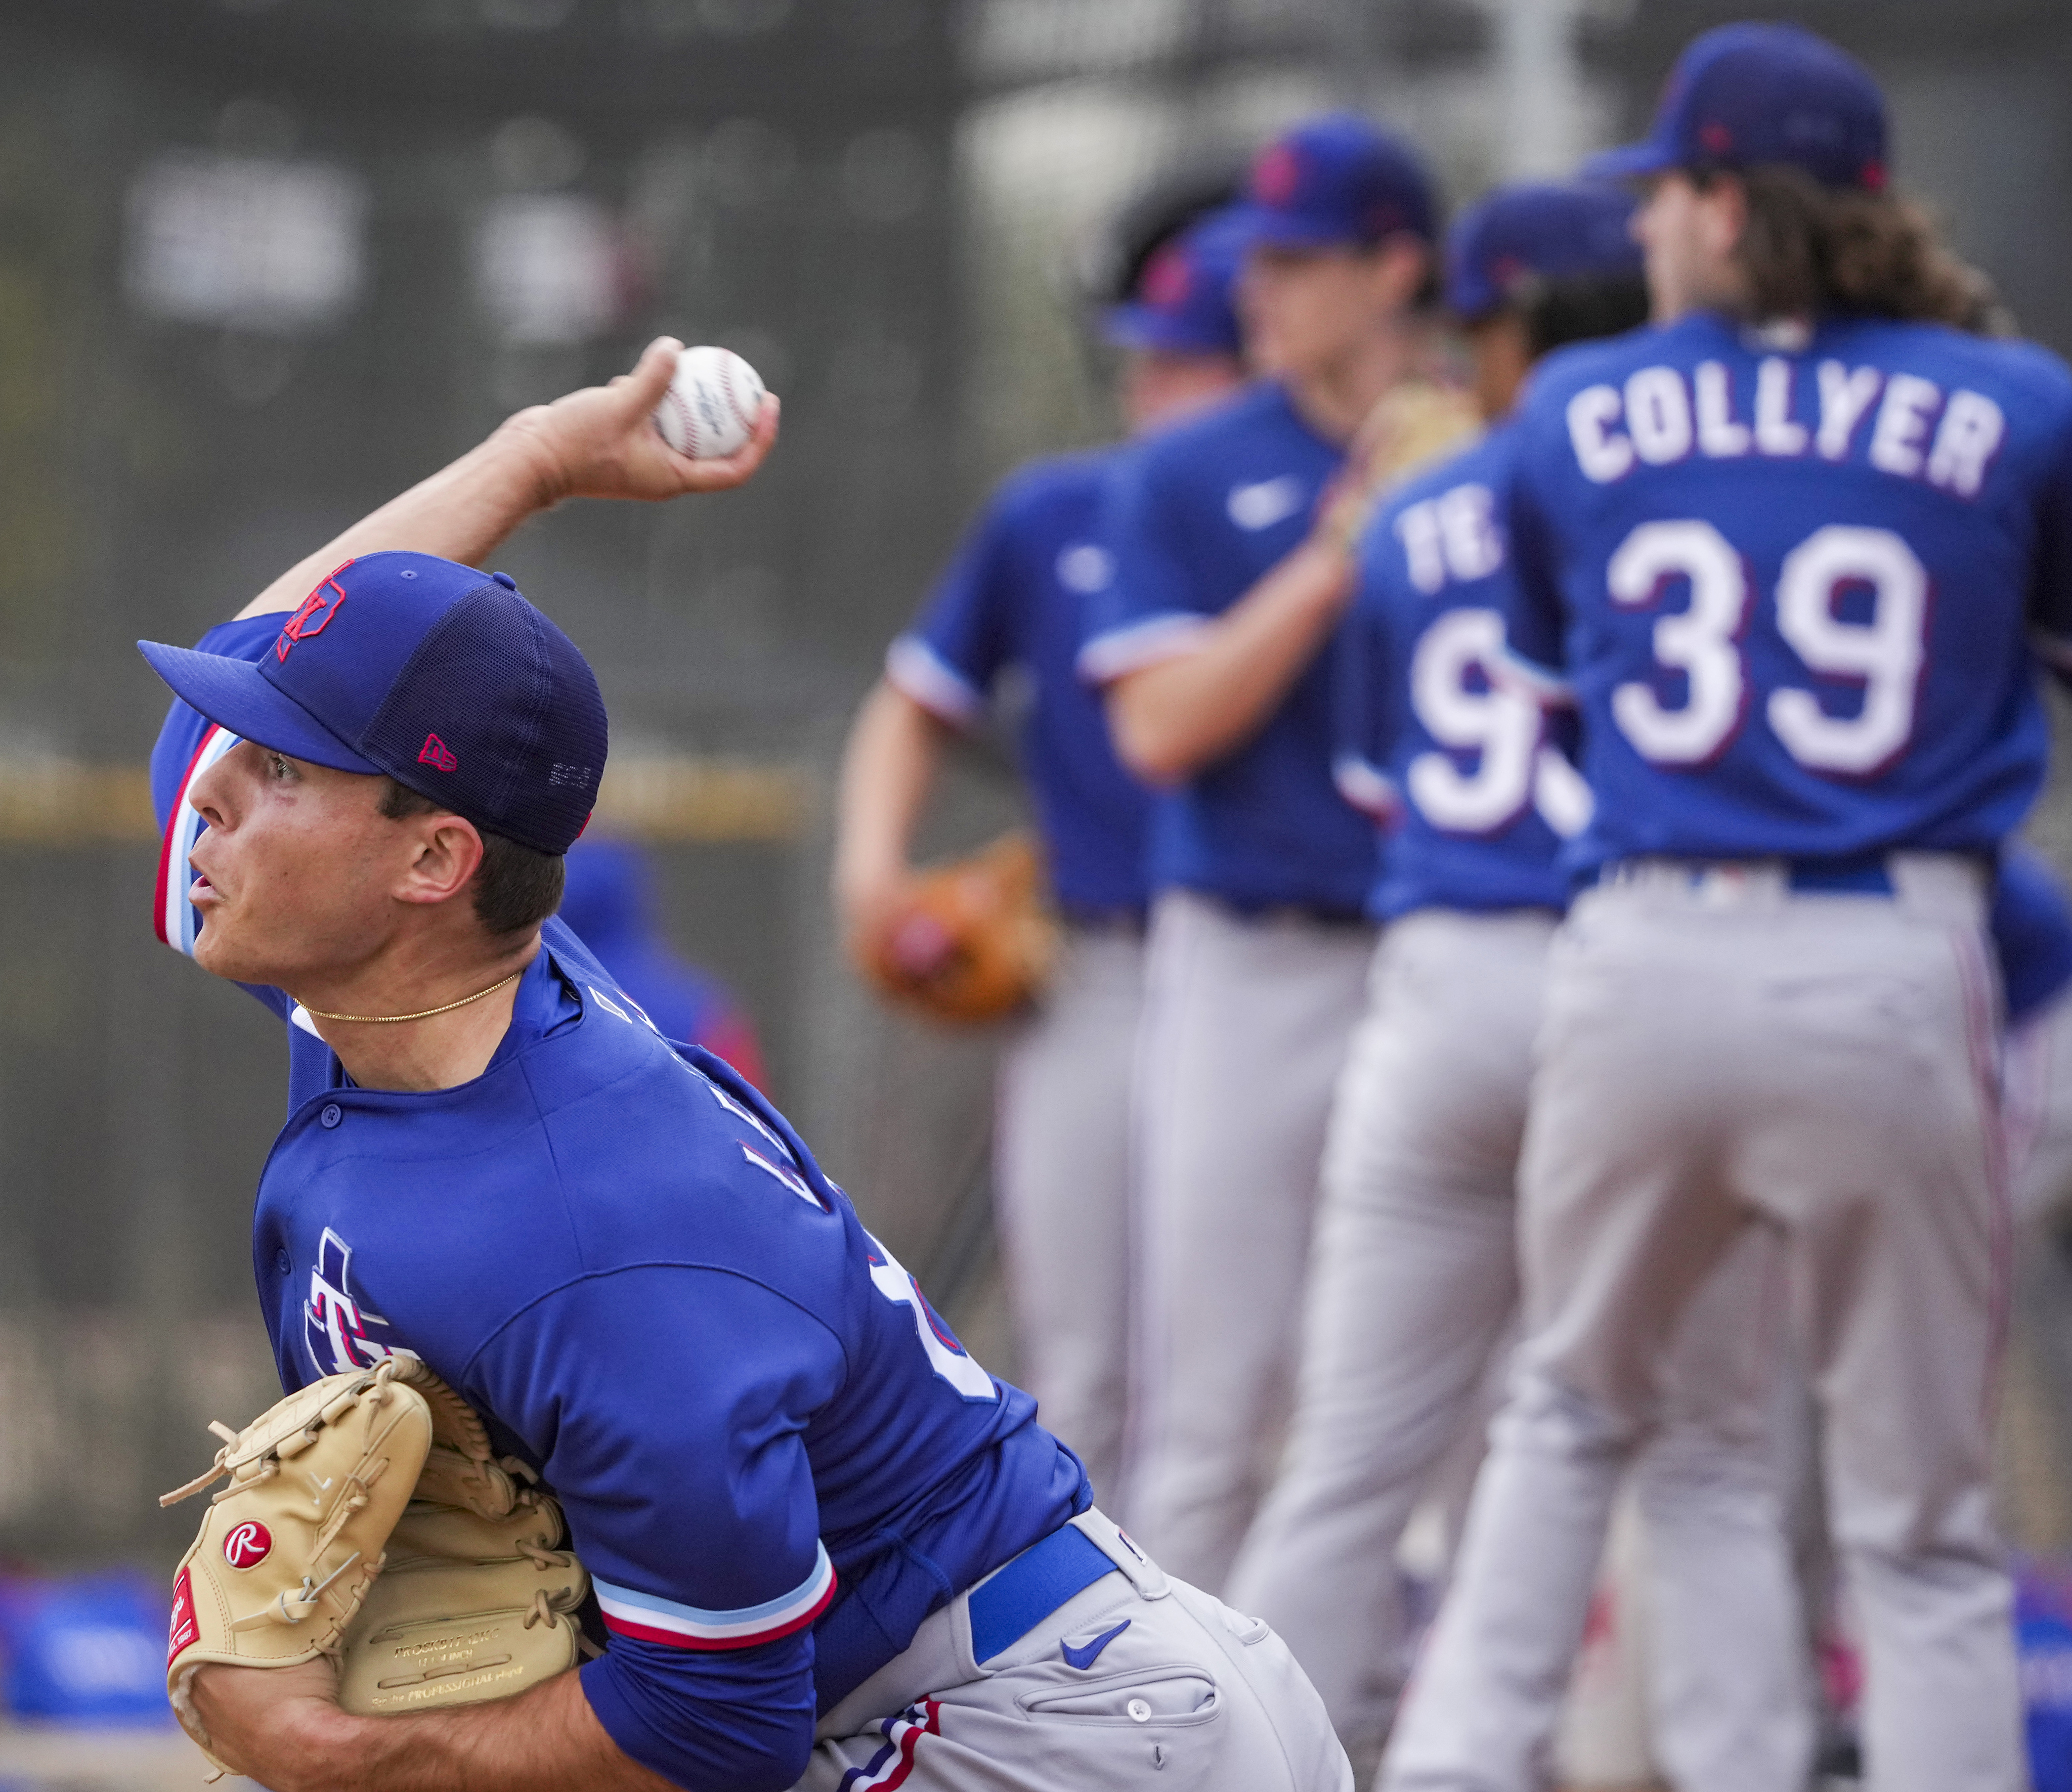 Future Rangers hurler Jack Leiter is now a pro pitcher — maybe